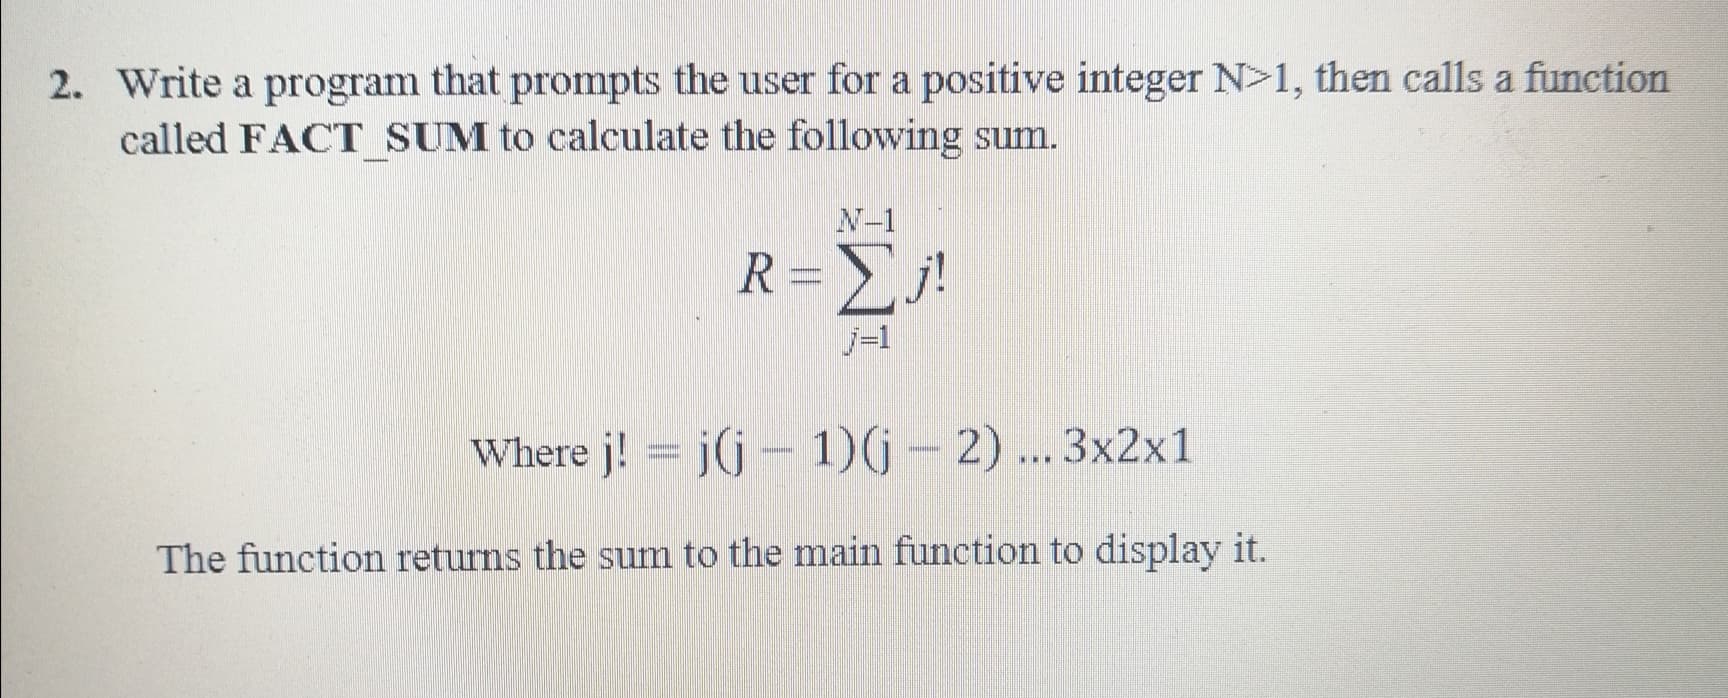 Write a program that prompts the user for a positive integer N>1, then calls a function
called FACT SUM to calculate the following sum.
N-1
R=j!
j-1
Where j! = j(j- 1)(j-2)... 3x2x1
The function returns the sum to the main function to display it.
